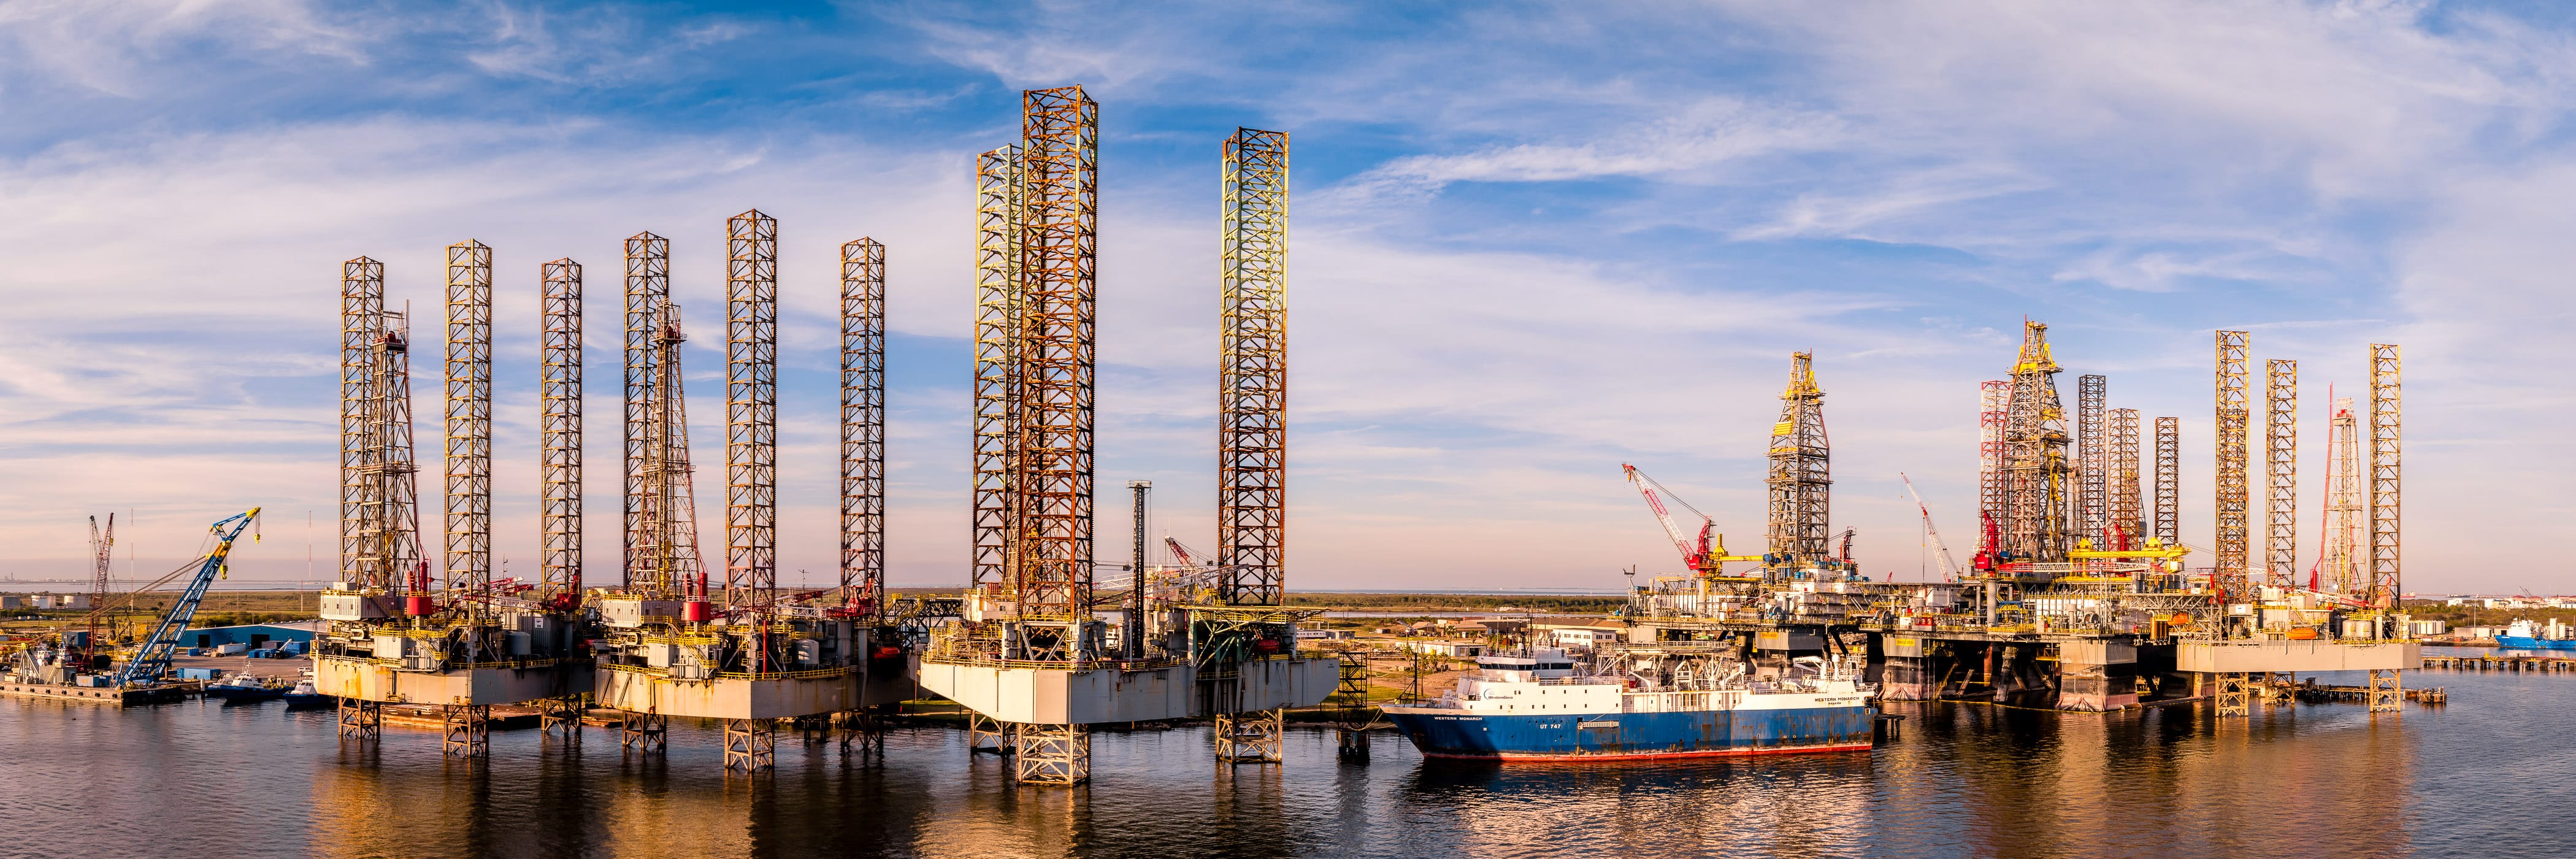 Long-legged oil platforms laid up for storage and repair at Pelican Island, Galveston, Texas. 